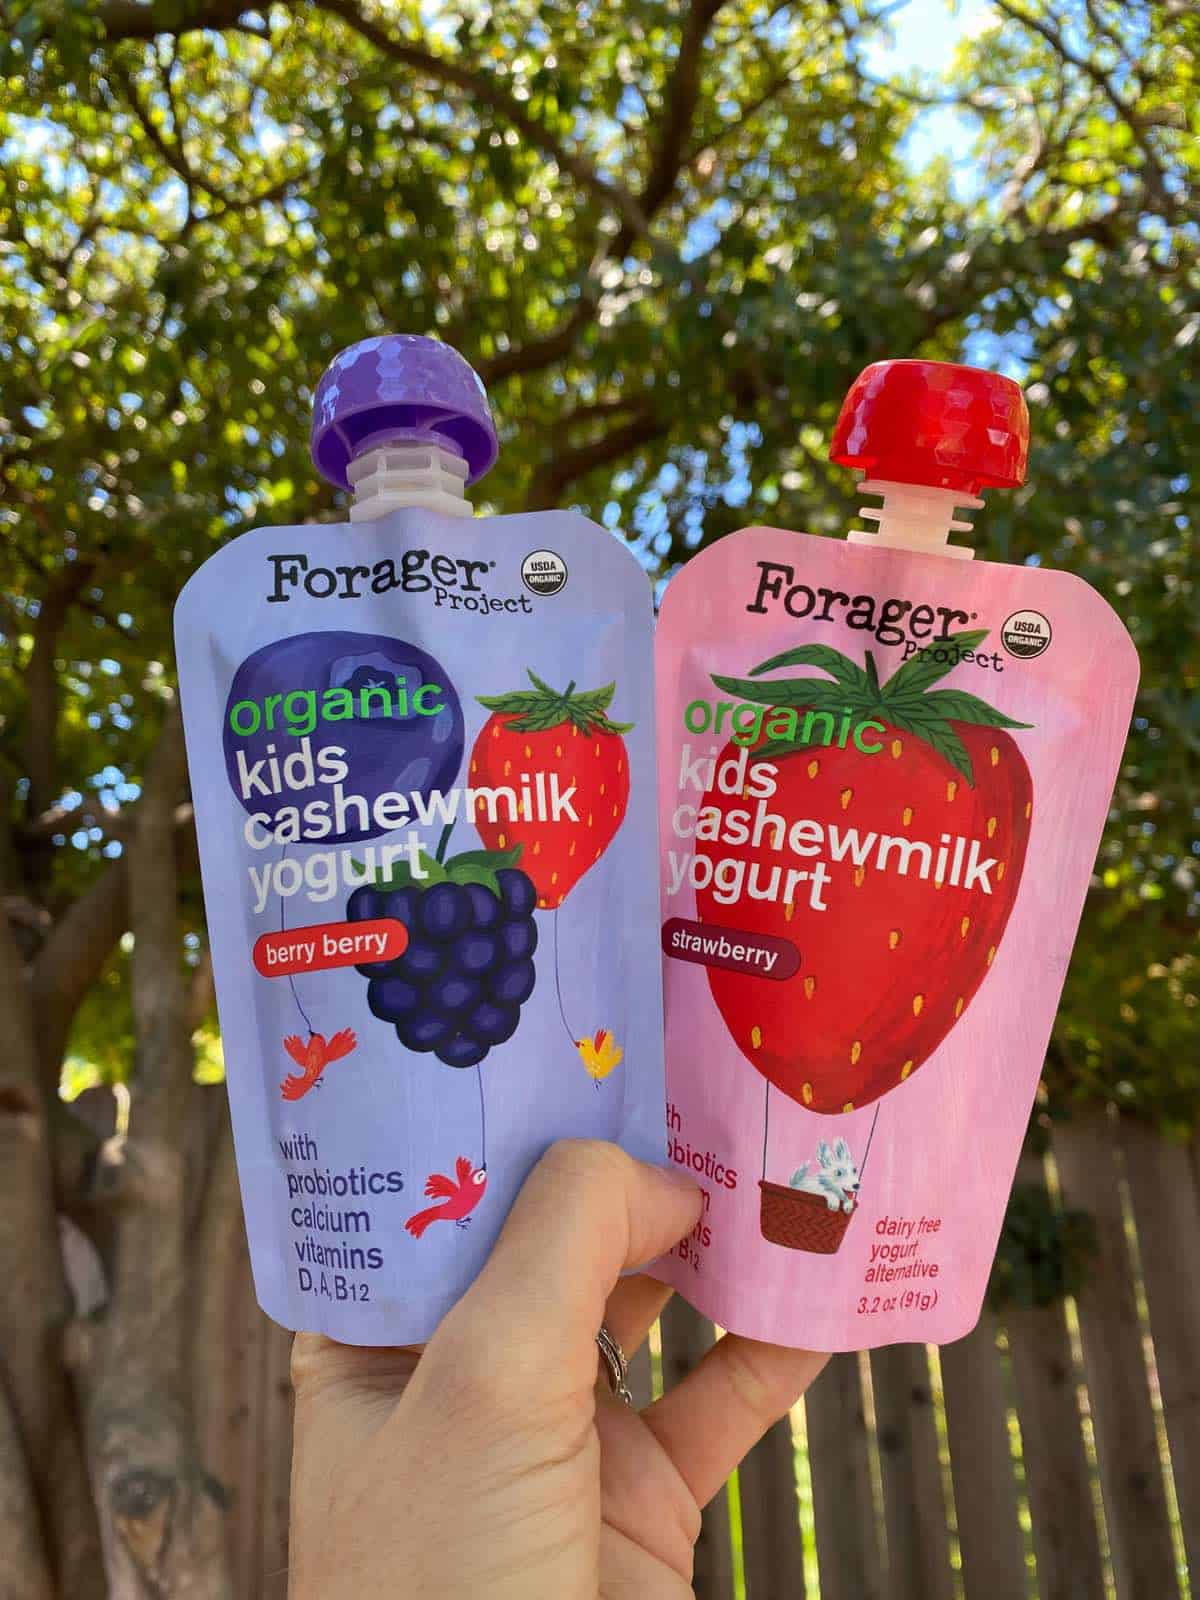 Vegan yogurt pouches in strawberry and blueberry flavor from Forager Project.